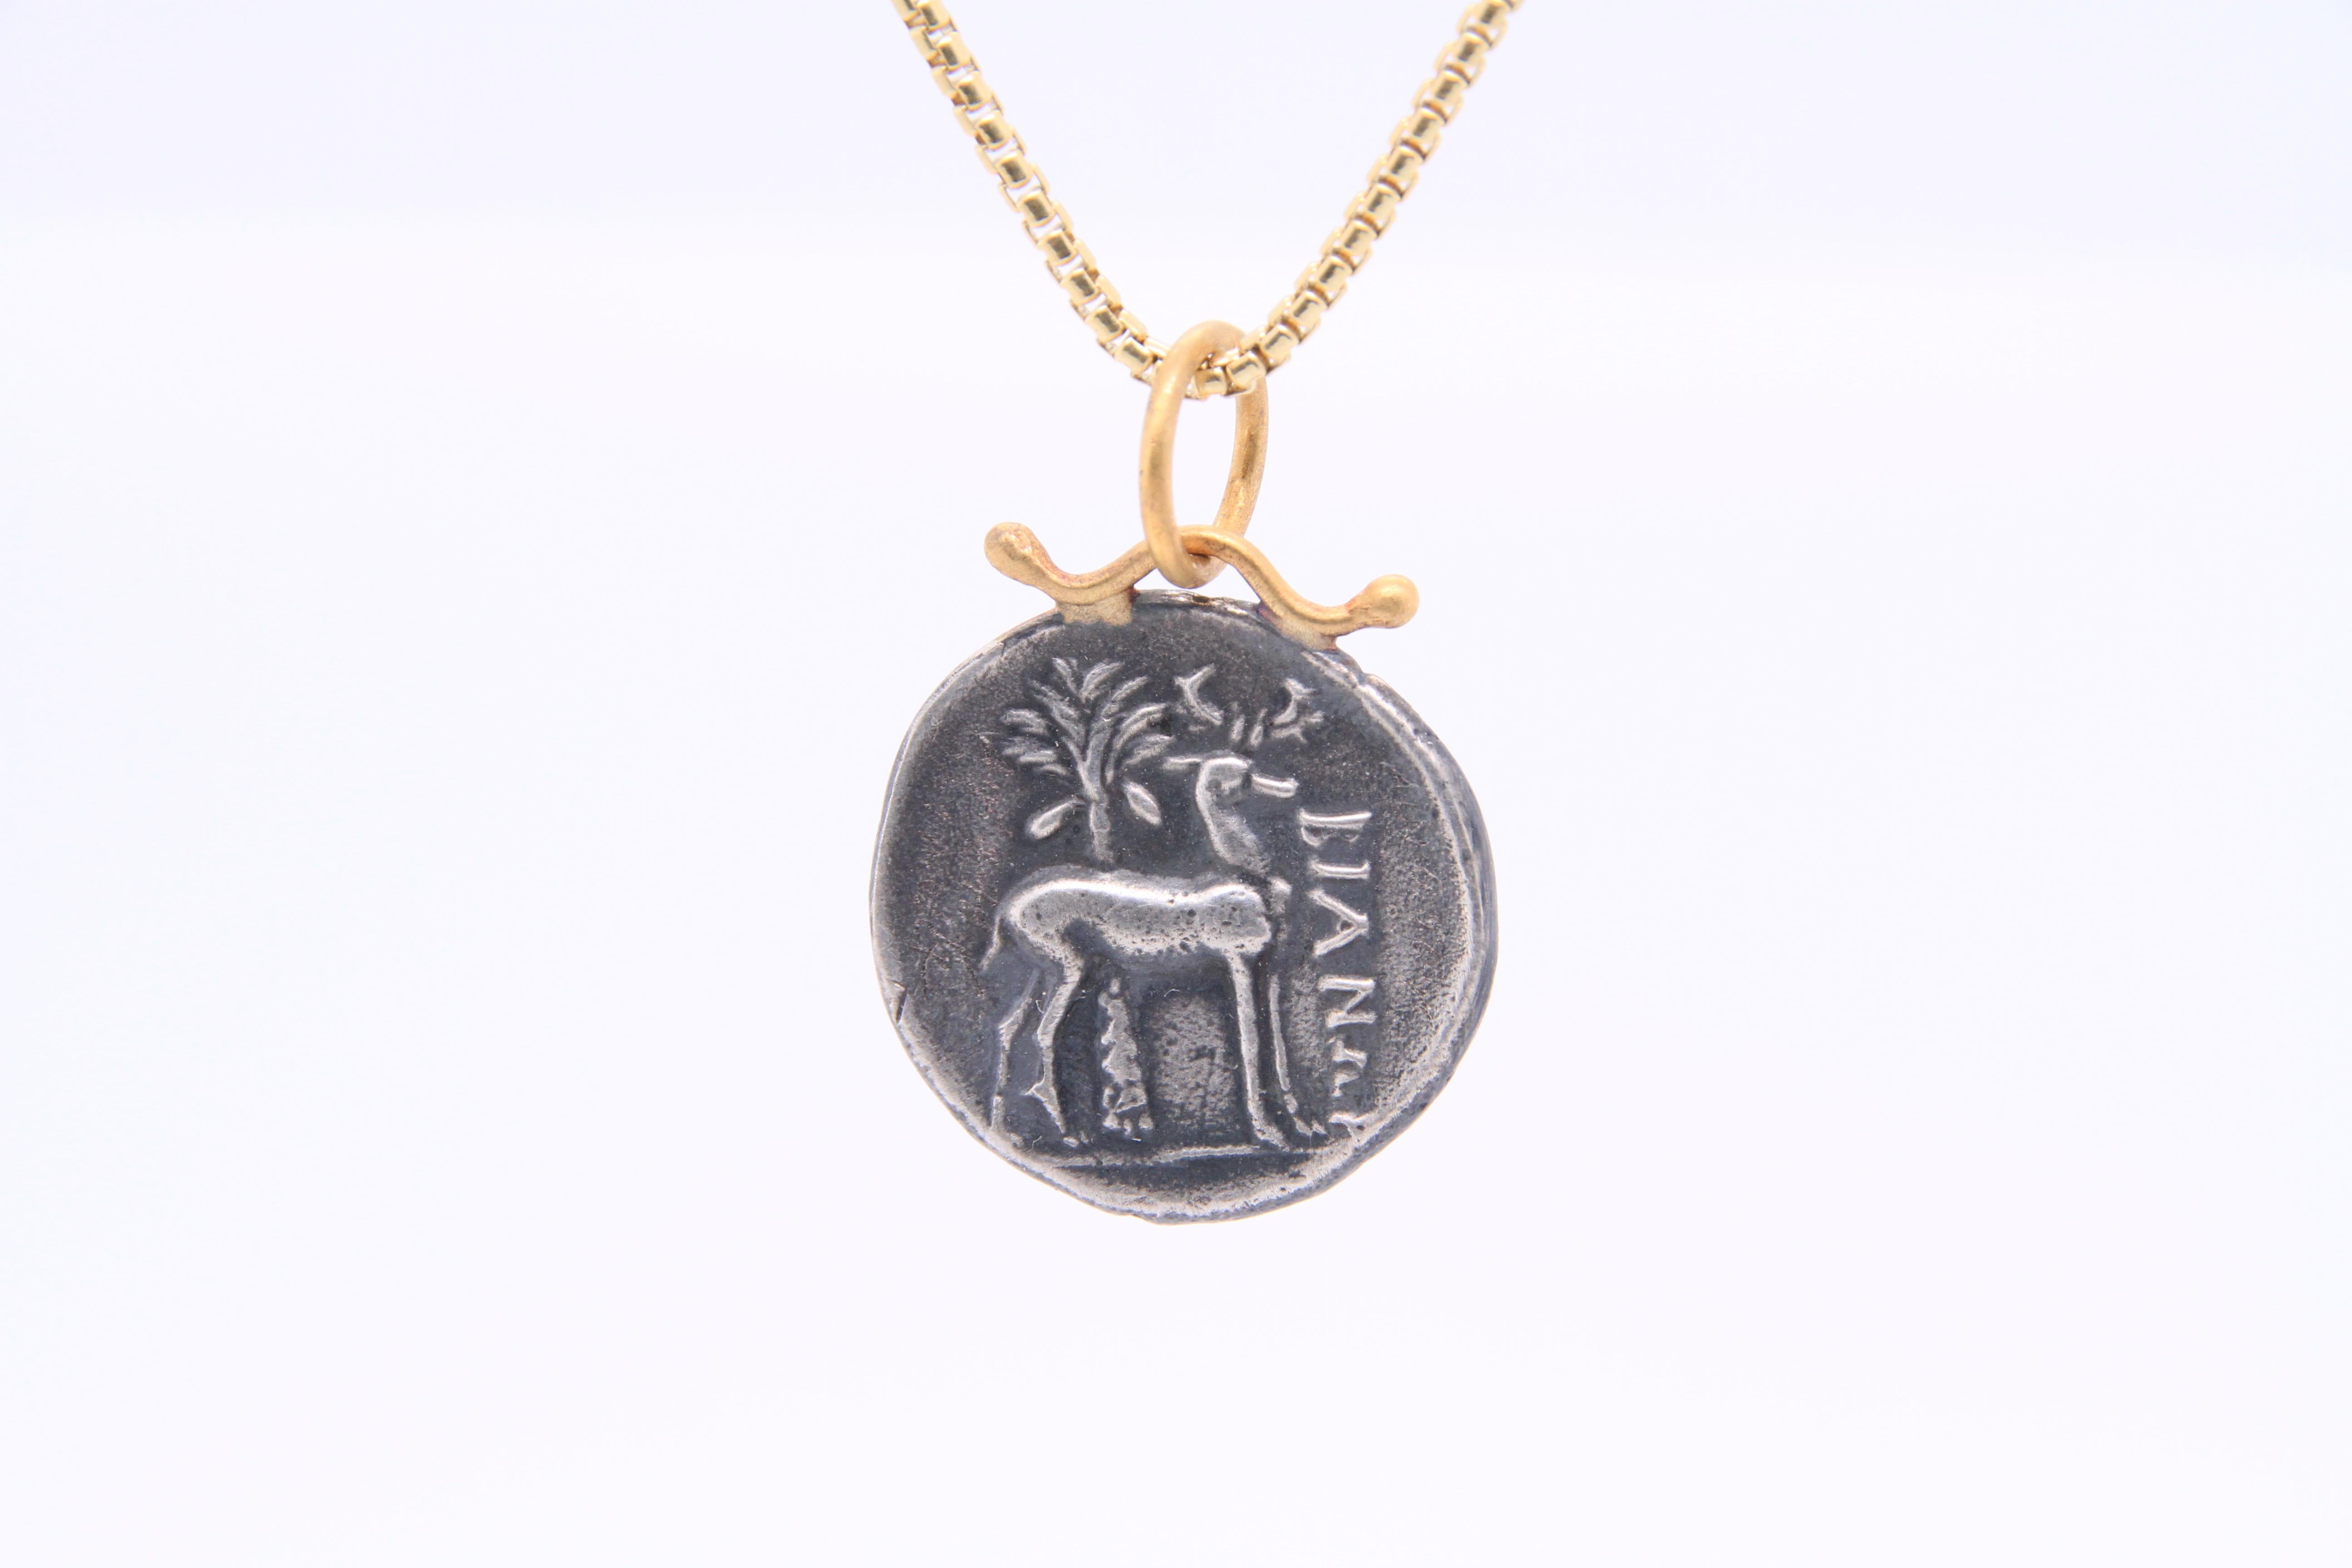 Women's or Men's Bee Coin Amulet with Diamond, 24kt Gold and Silver, Pendant Necklace from Turkey